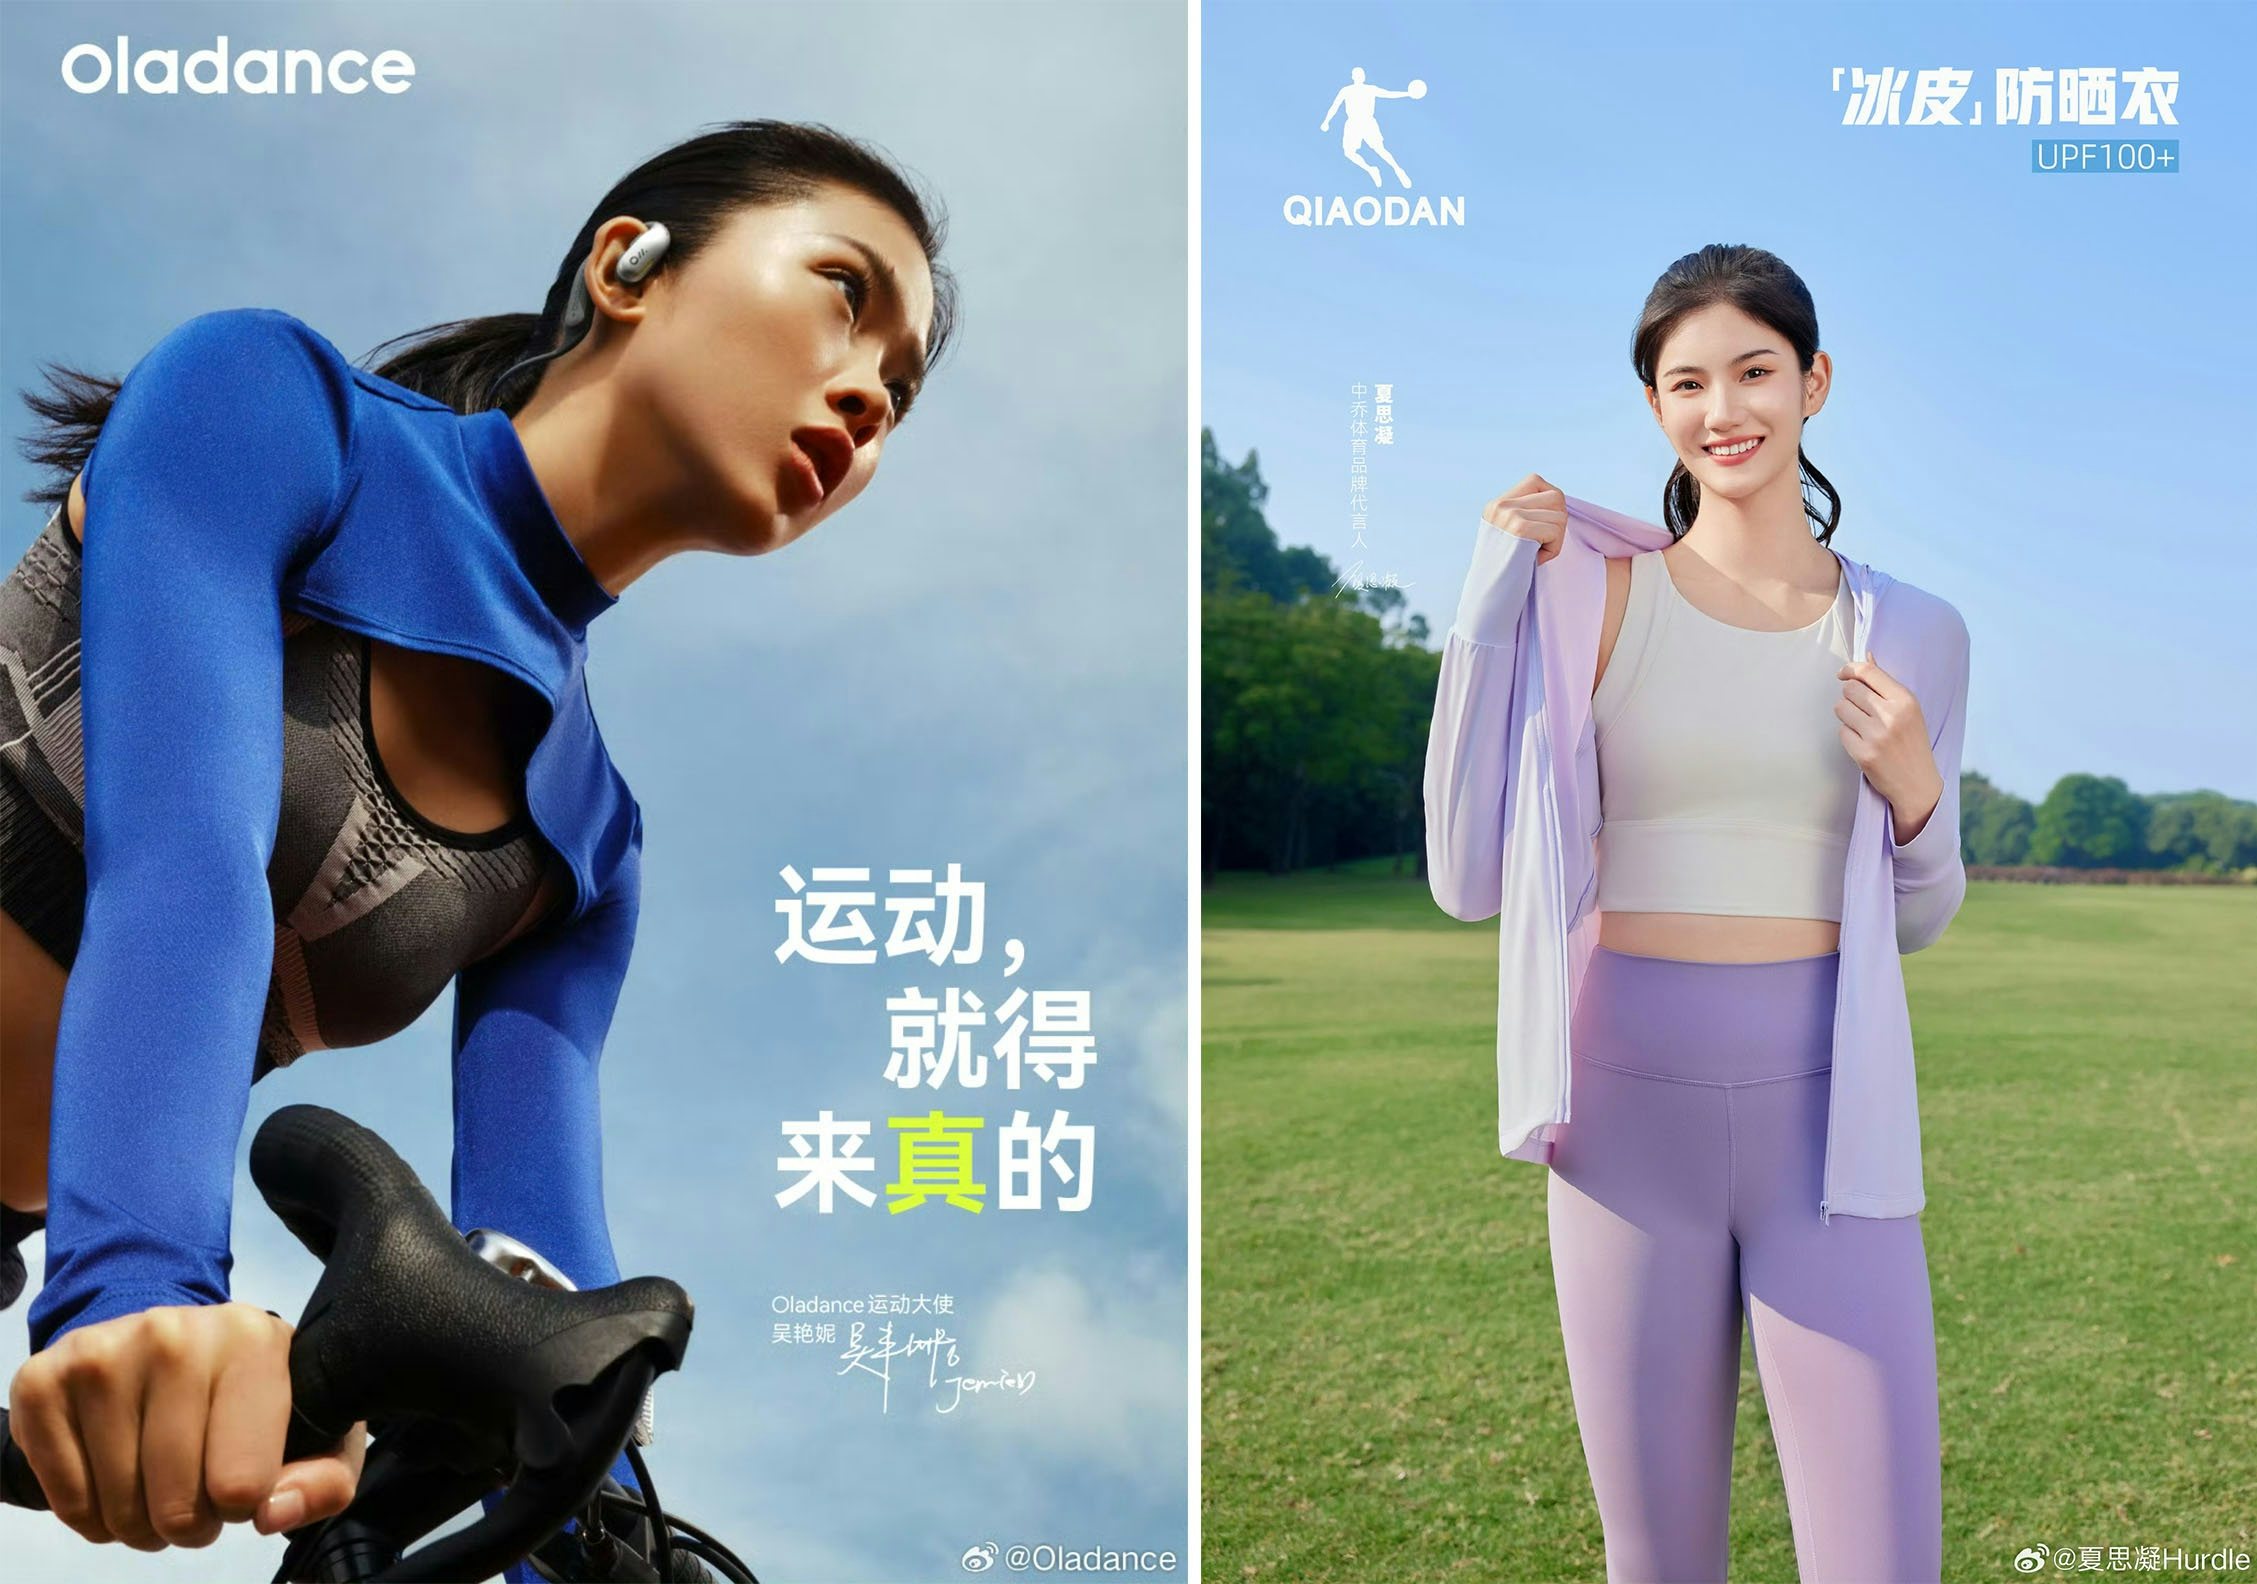 China’s sports marketing opportunities, from blokecore to skateboarding ...